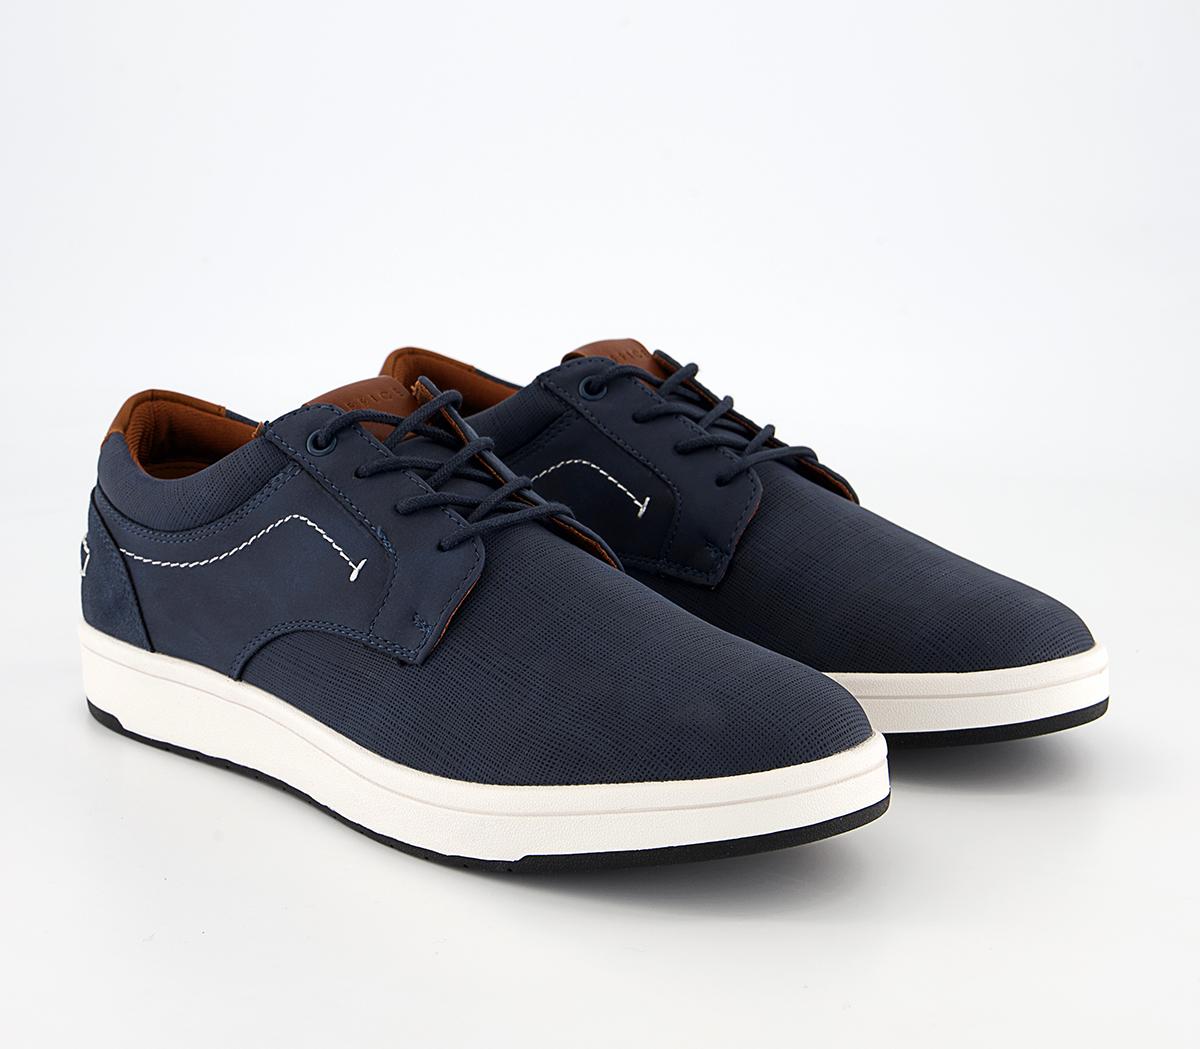 OFFICE Clifton Smart Casual Trainers Navy - Men's Casual Shoes